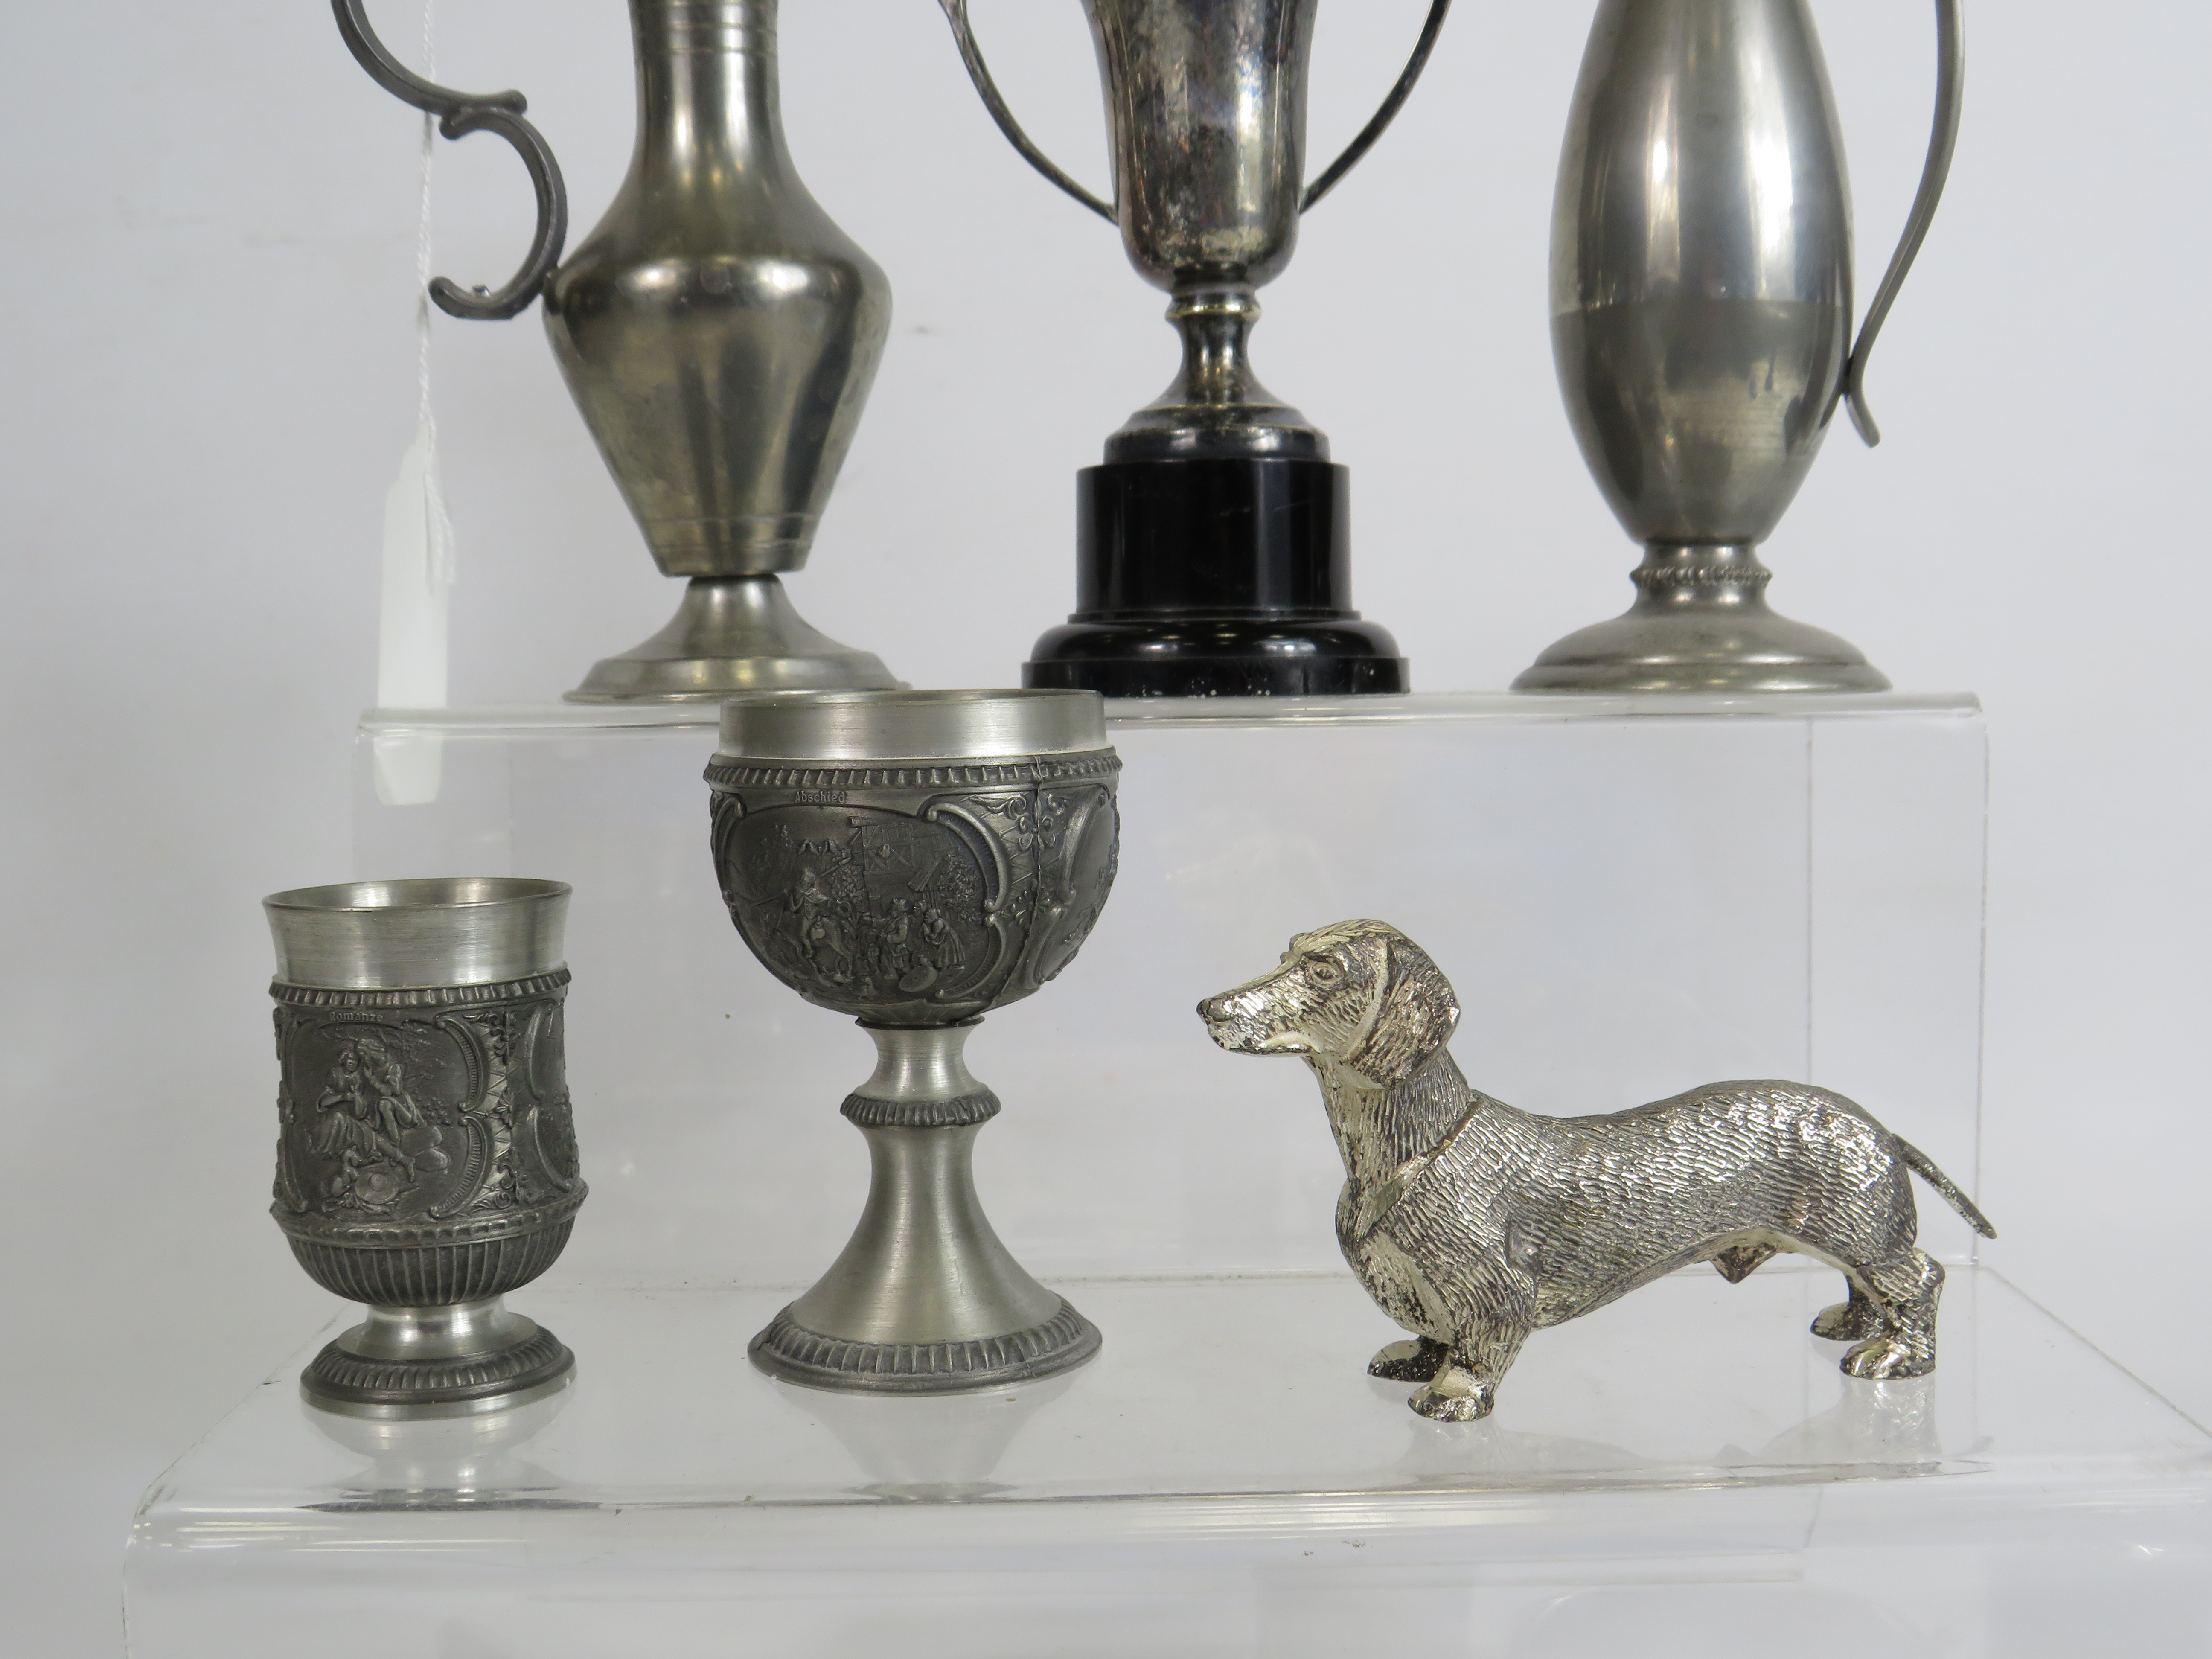 Selection of various Silver plated and pewter items, some which are Danish. - Image 2 of 3